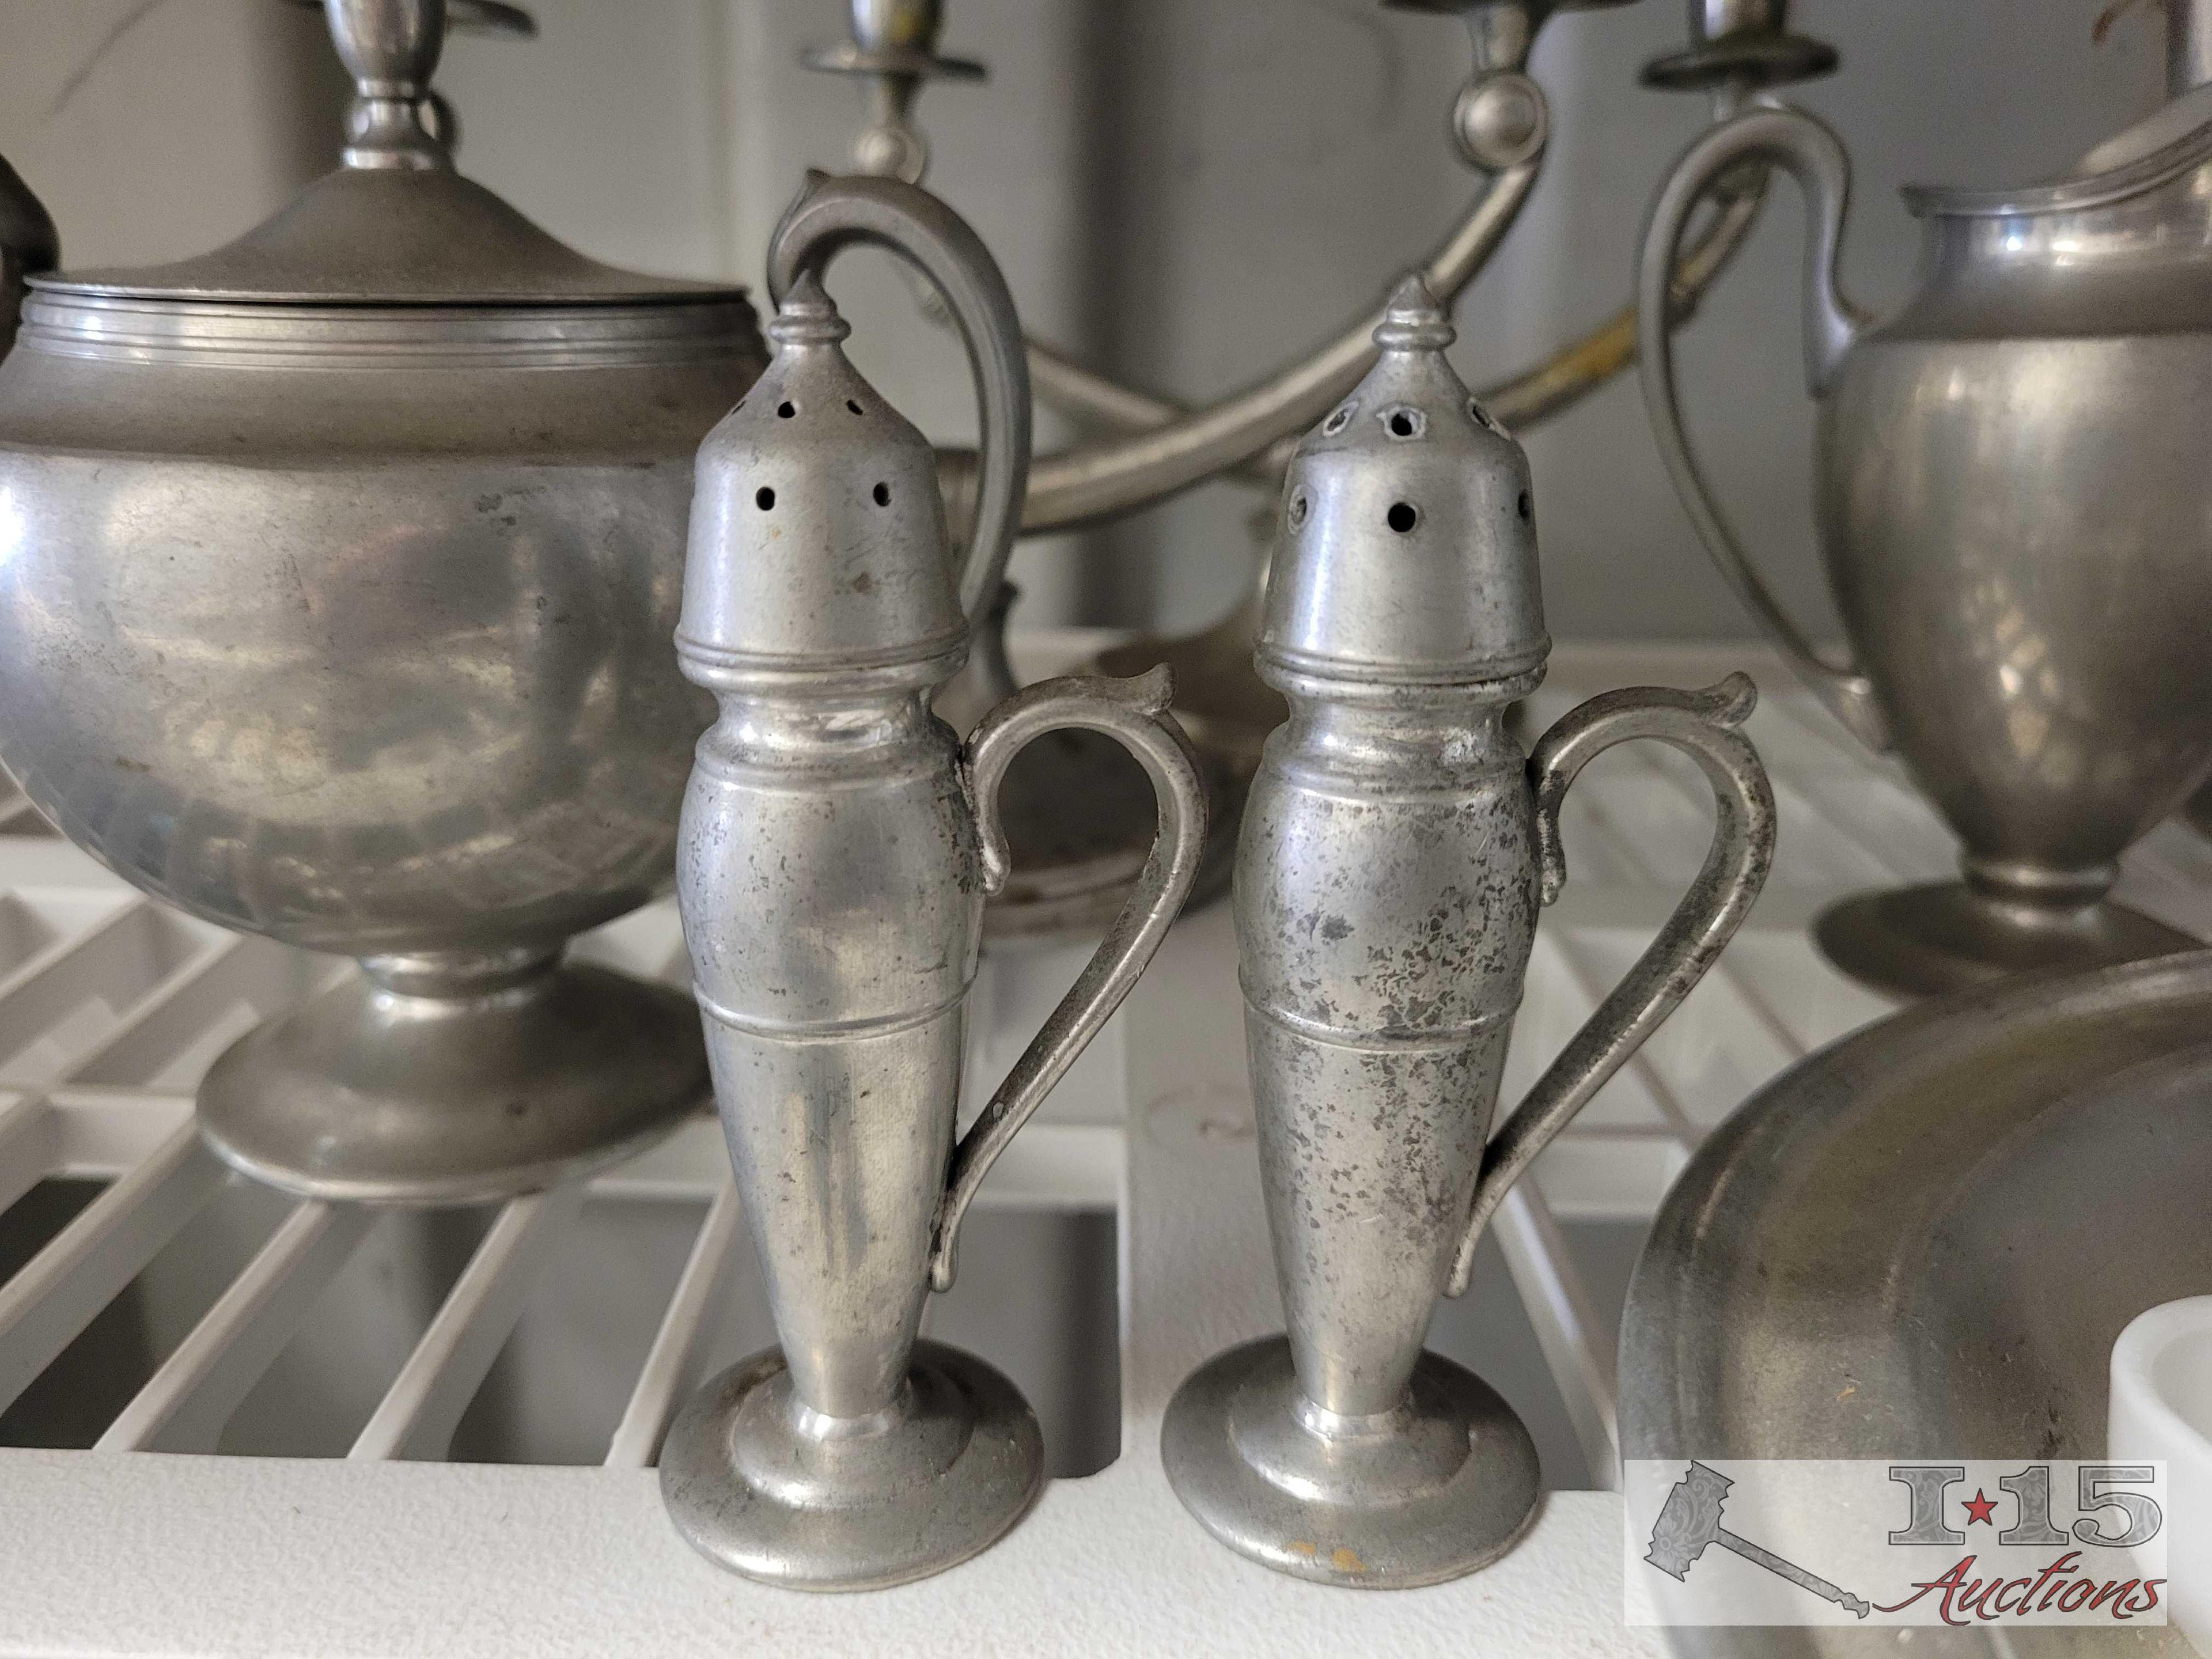 (9) Insico Pewter and (15) Japanese Miniatures